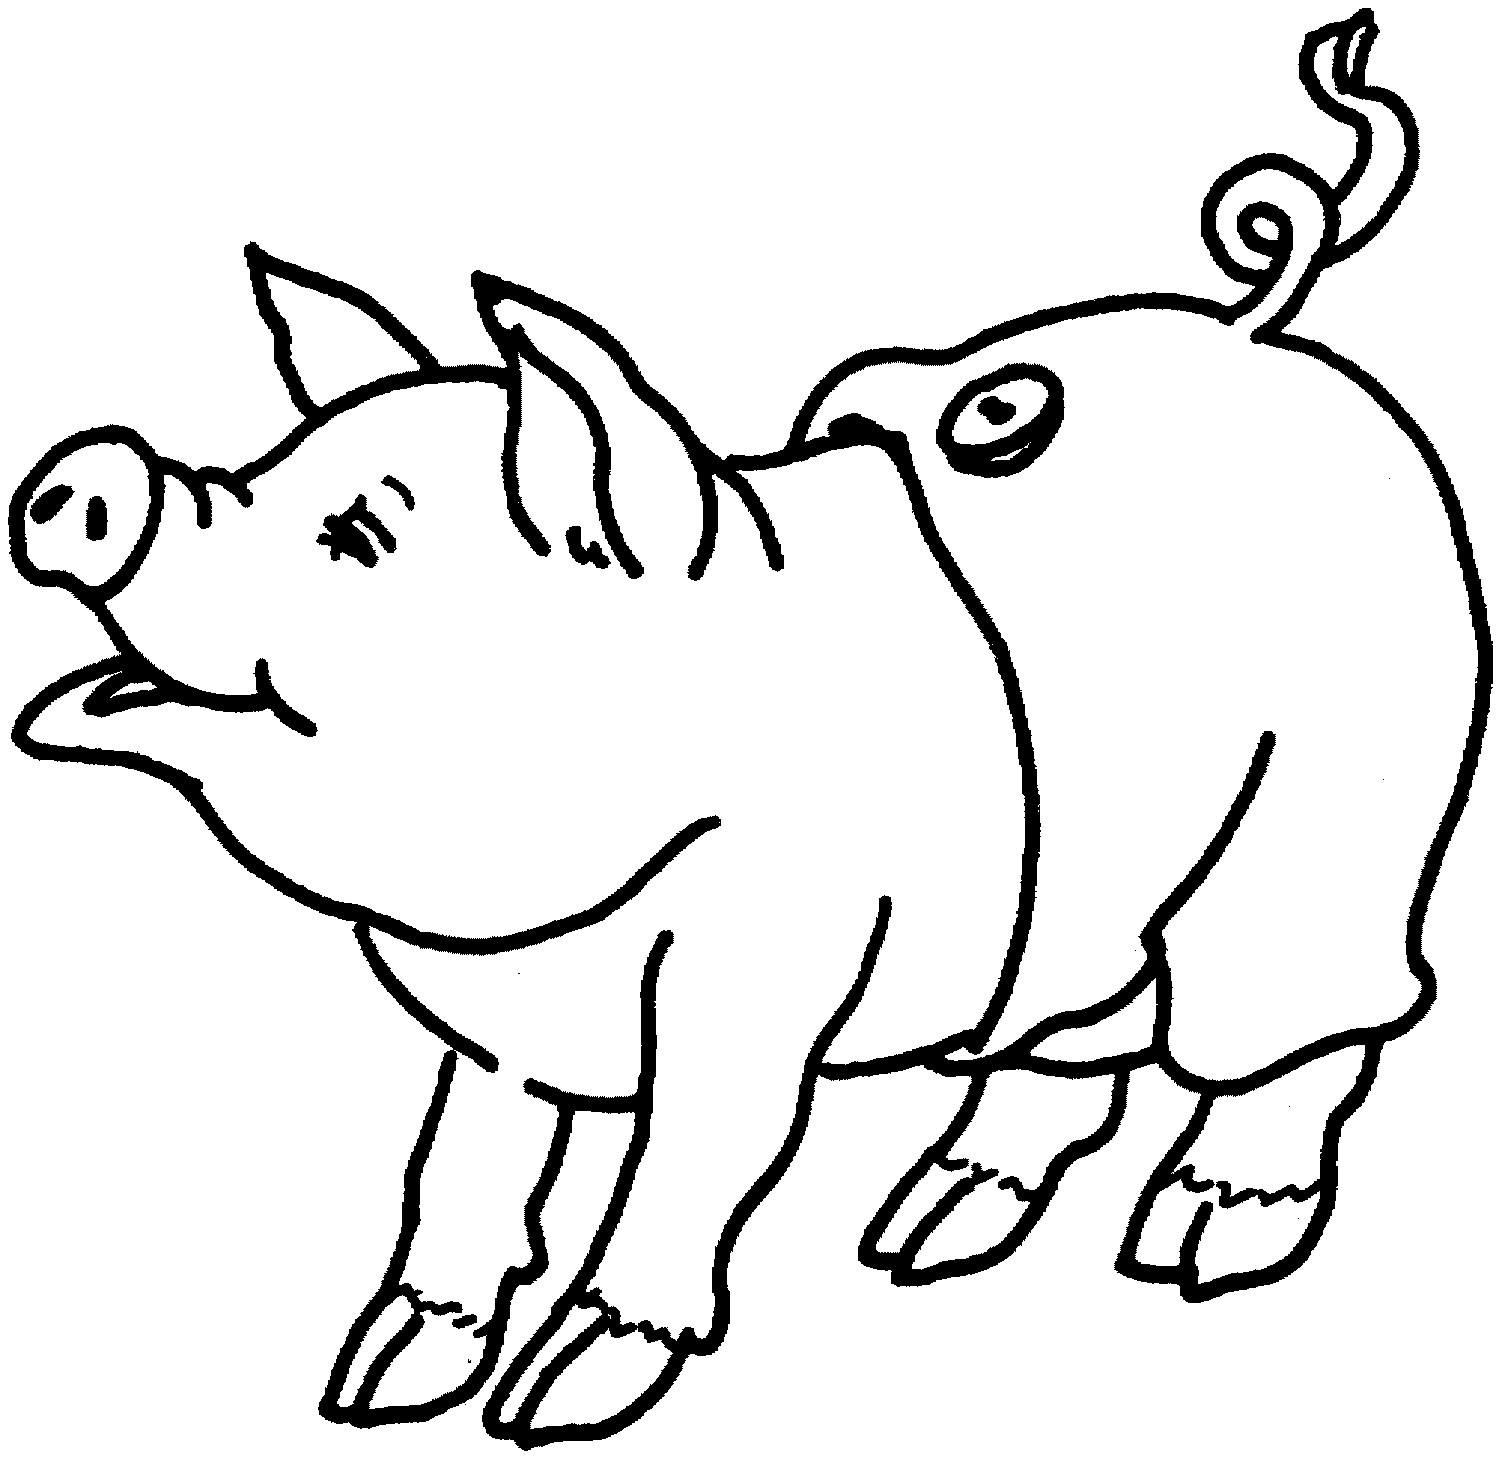 Pigs Coloring Pages
 Free Printable Pig Coloring Pages For Kids